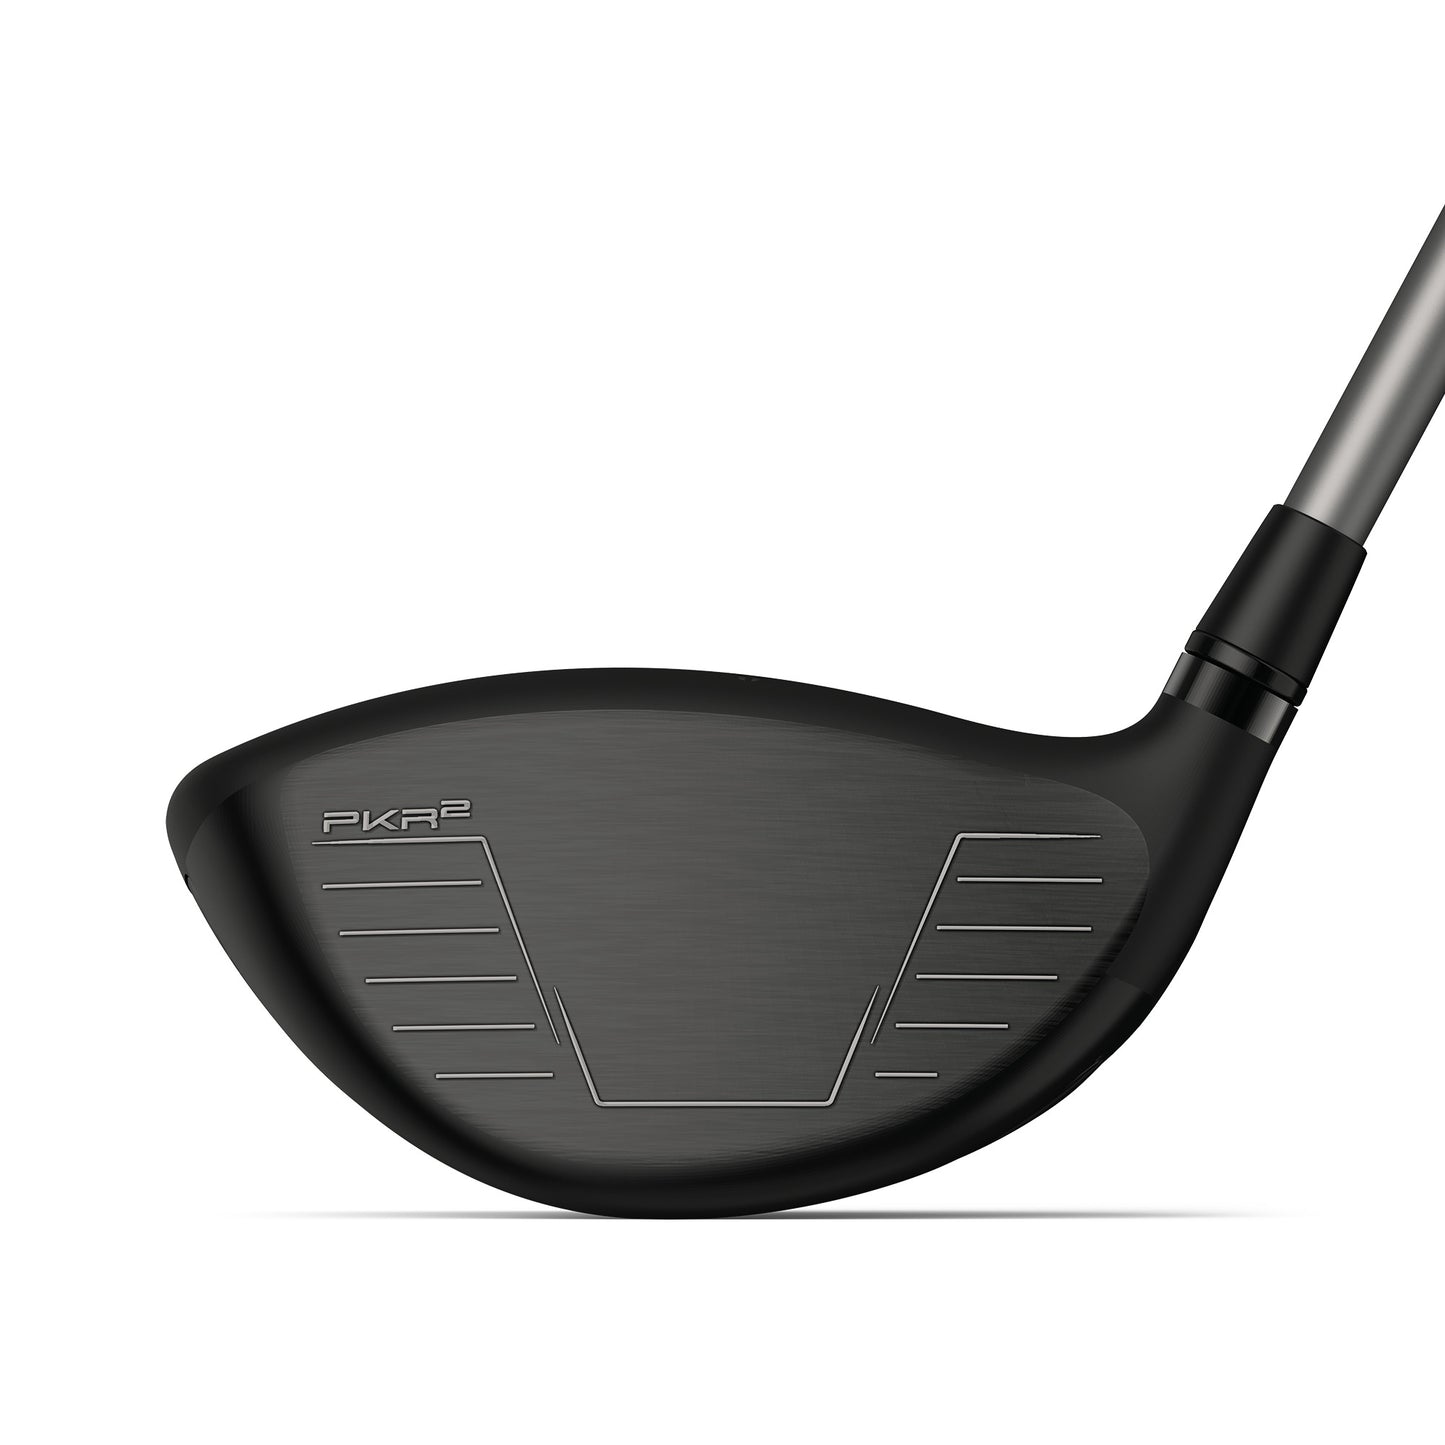 Wilson Staff Dynapower Carbon Driver   